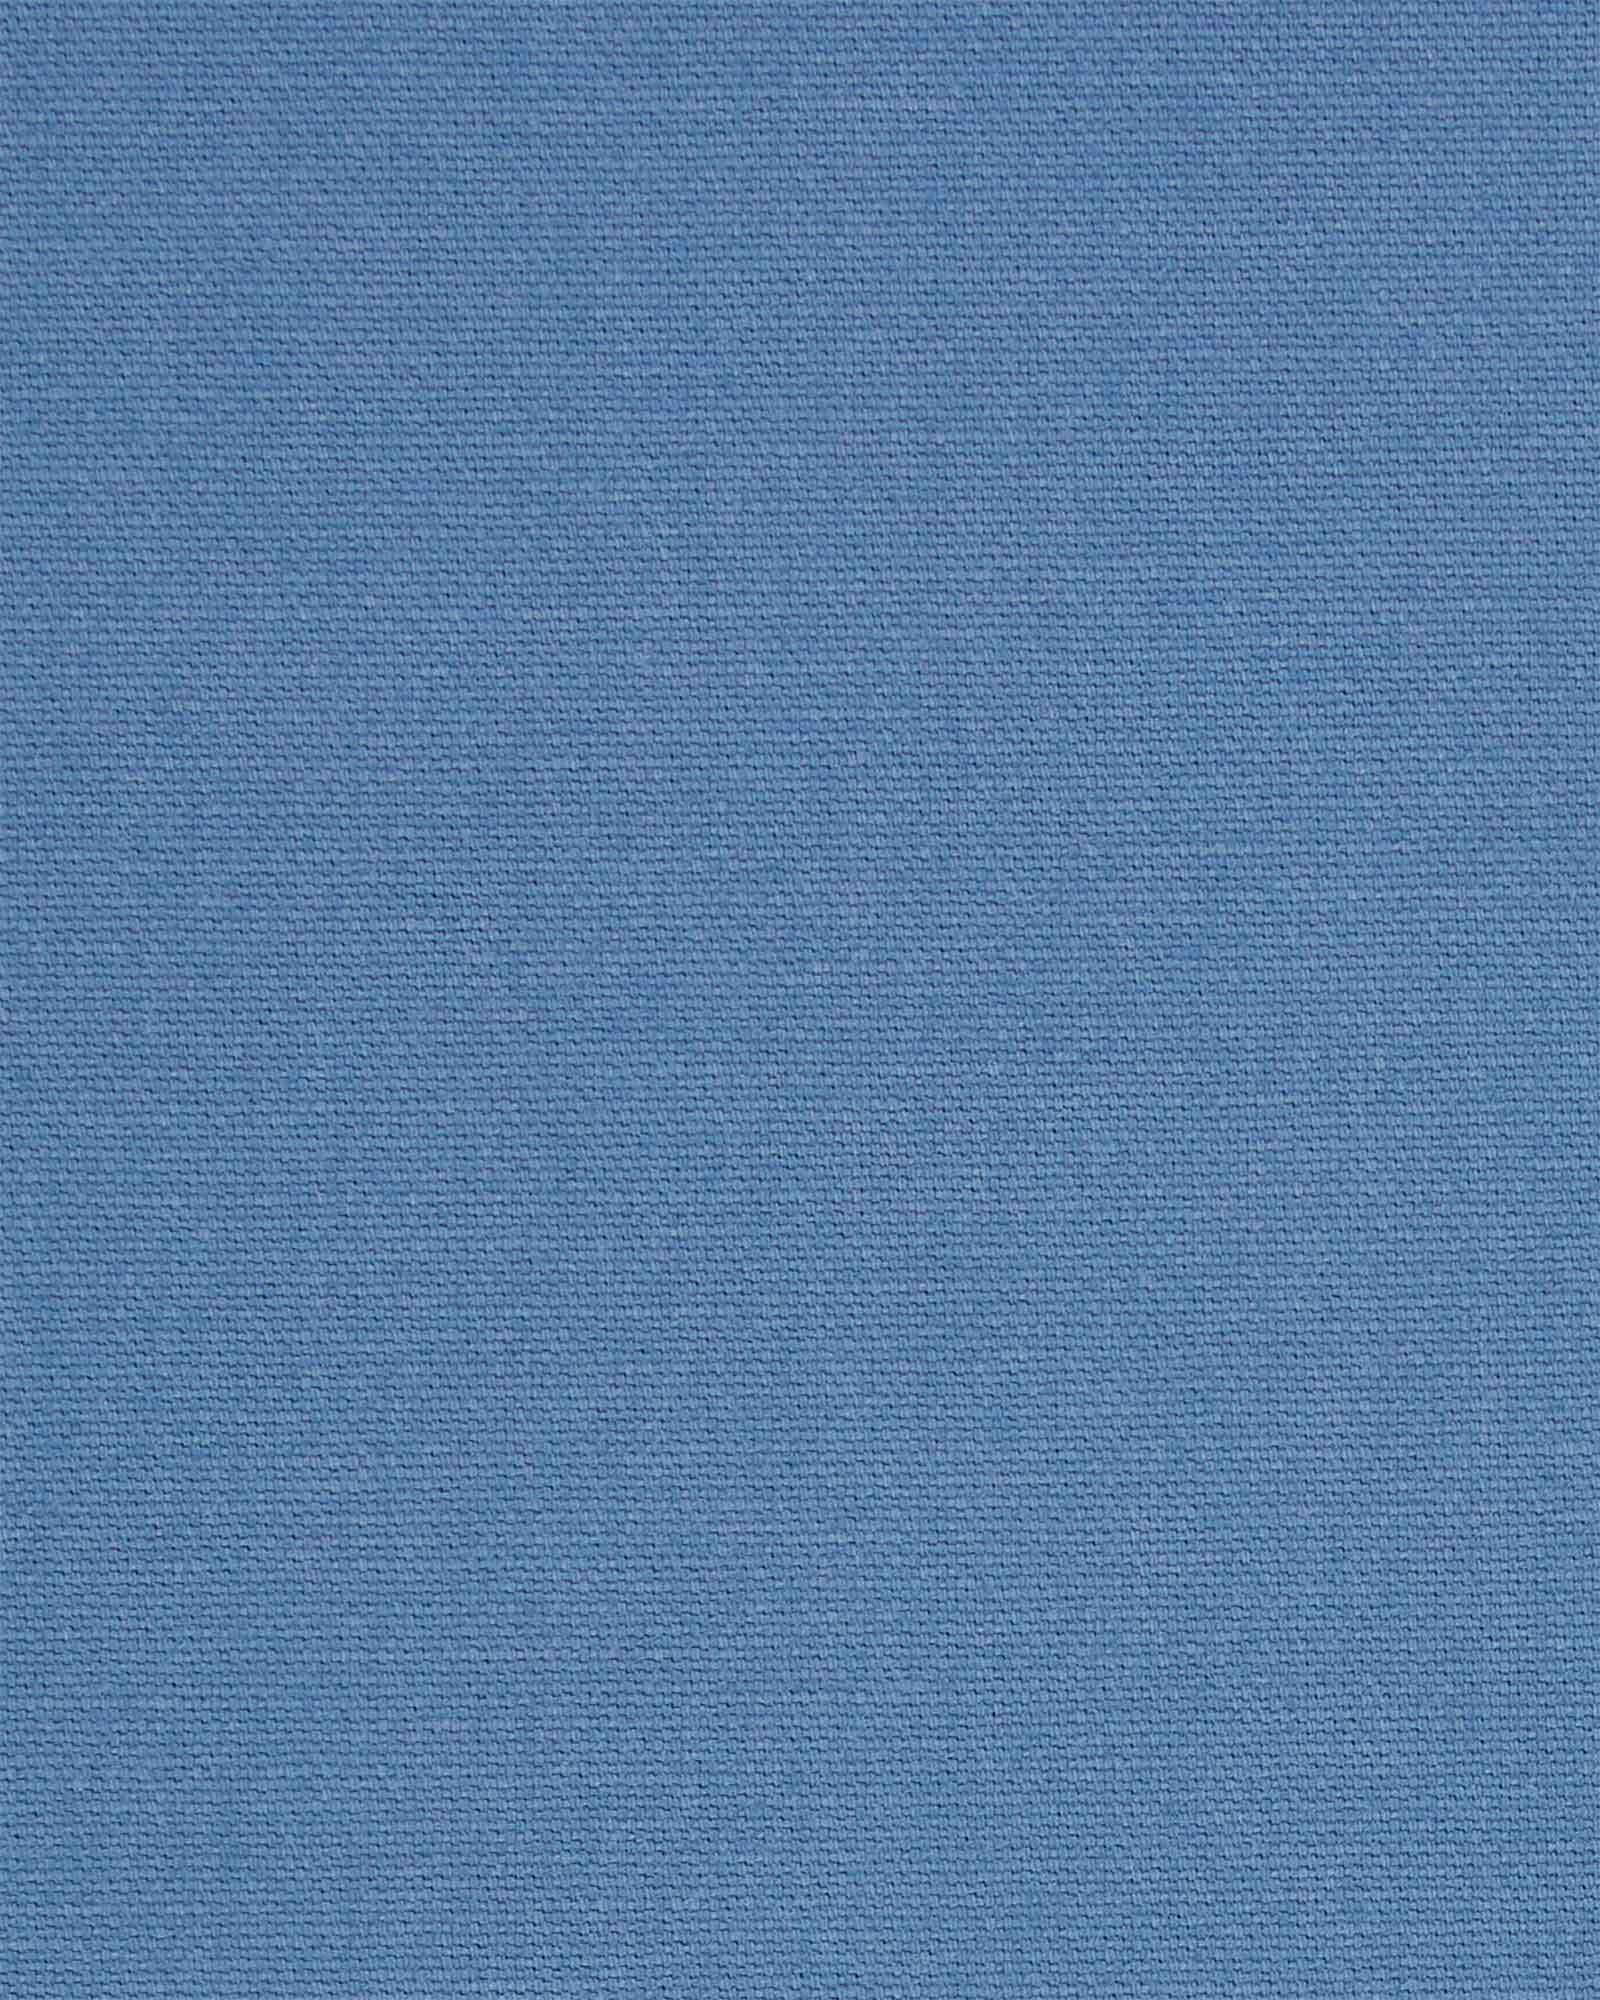 Brushed Cotton Canvas - French Blue